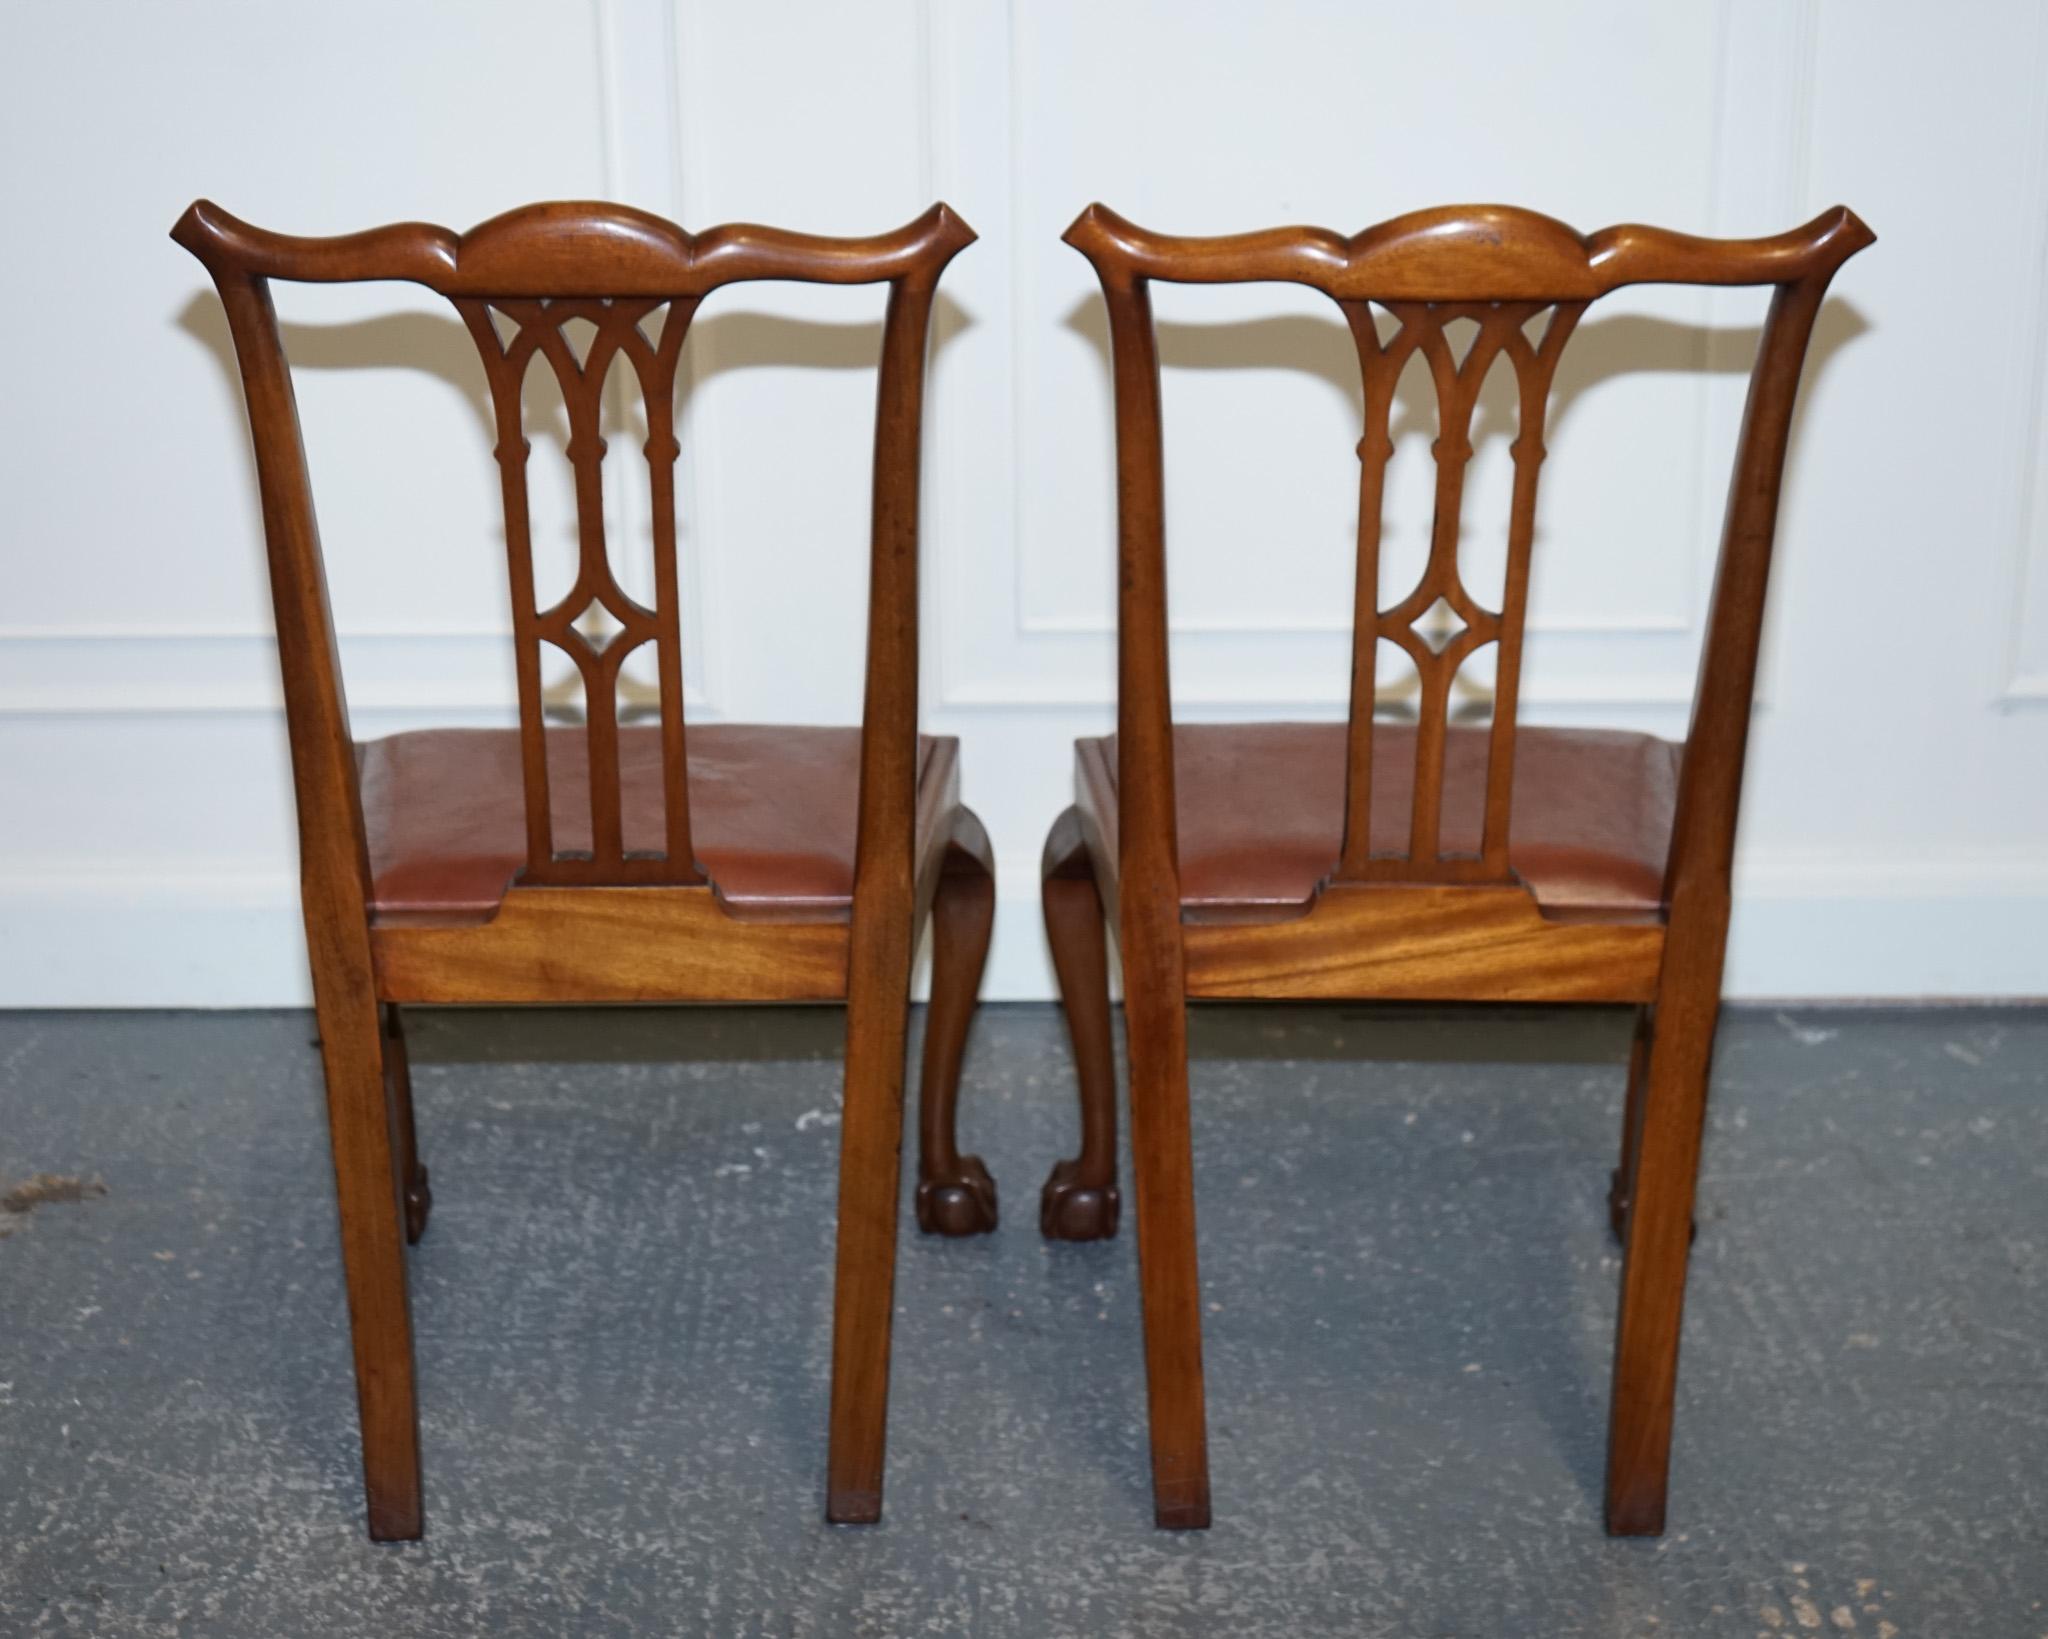 Hand-Crafted CHIPPENDALE STYLE 5 DINING CHAIRS WiTH LEATHER SEATS PERFECT FOR ROUND TABLE For Sale